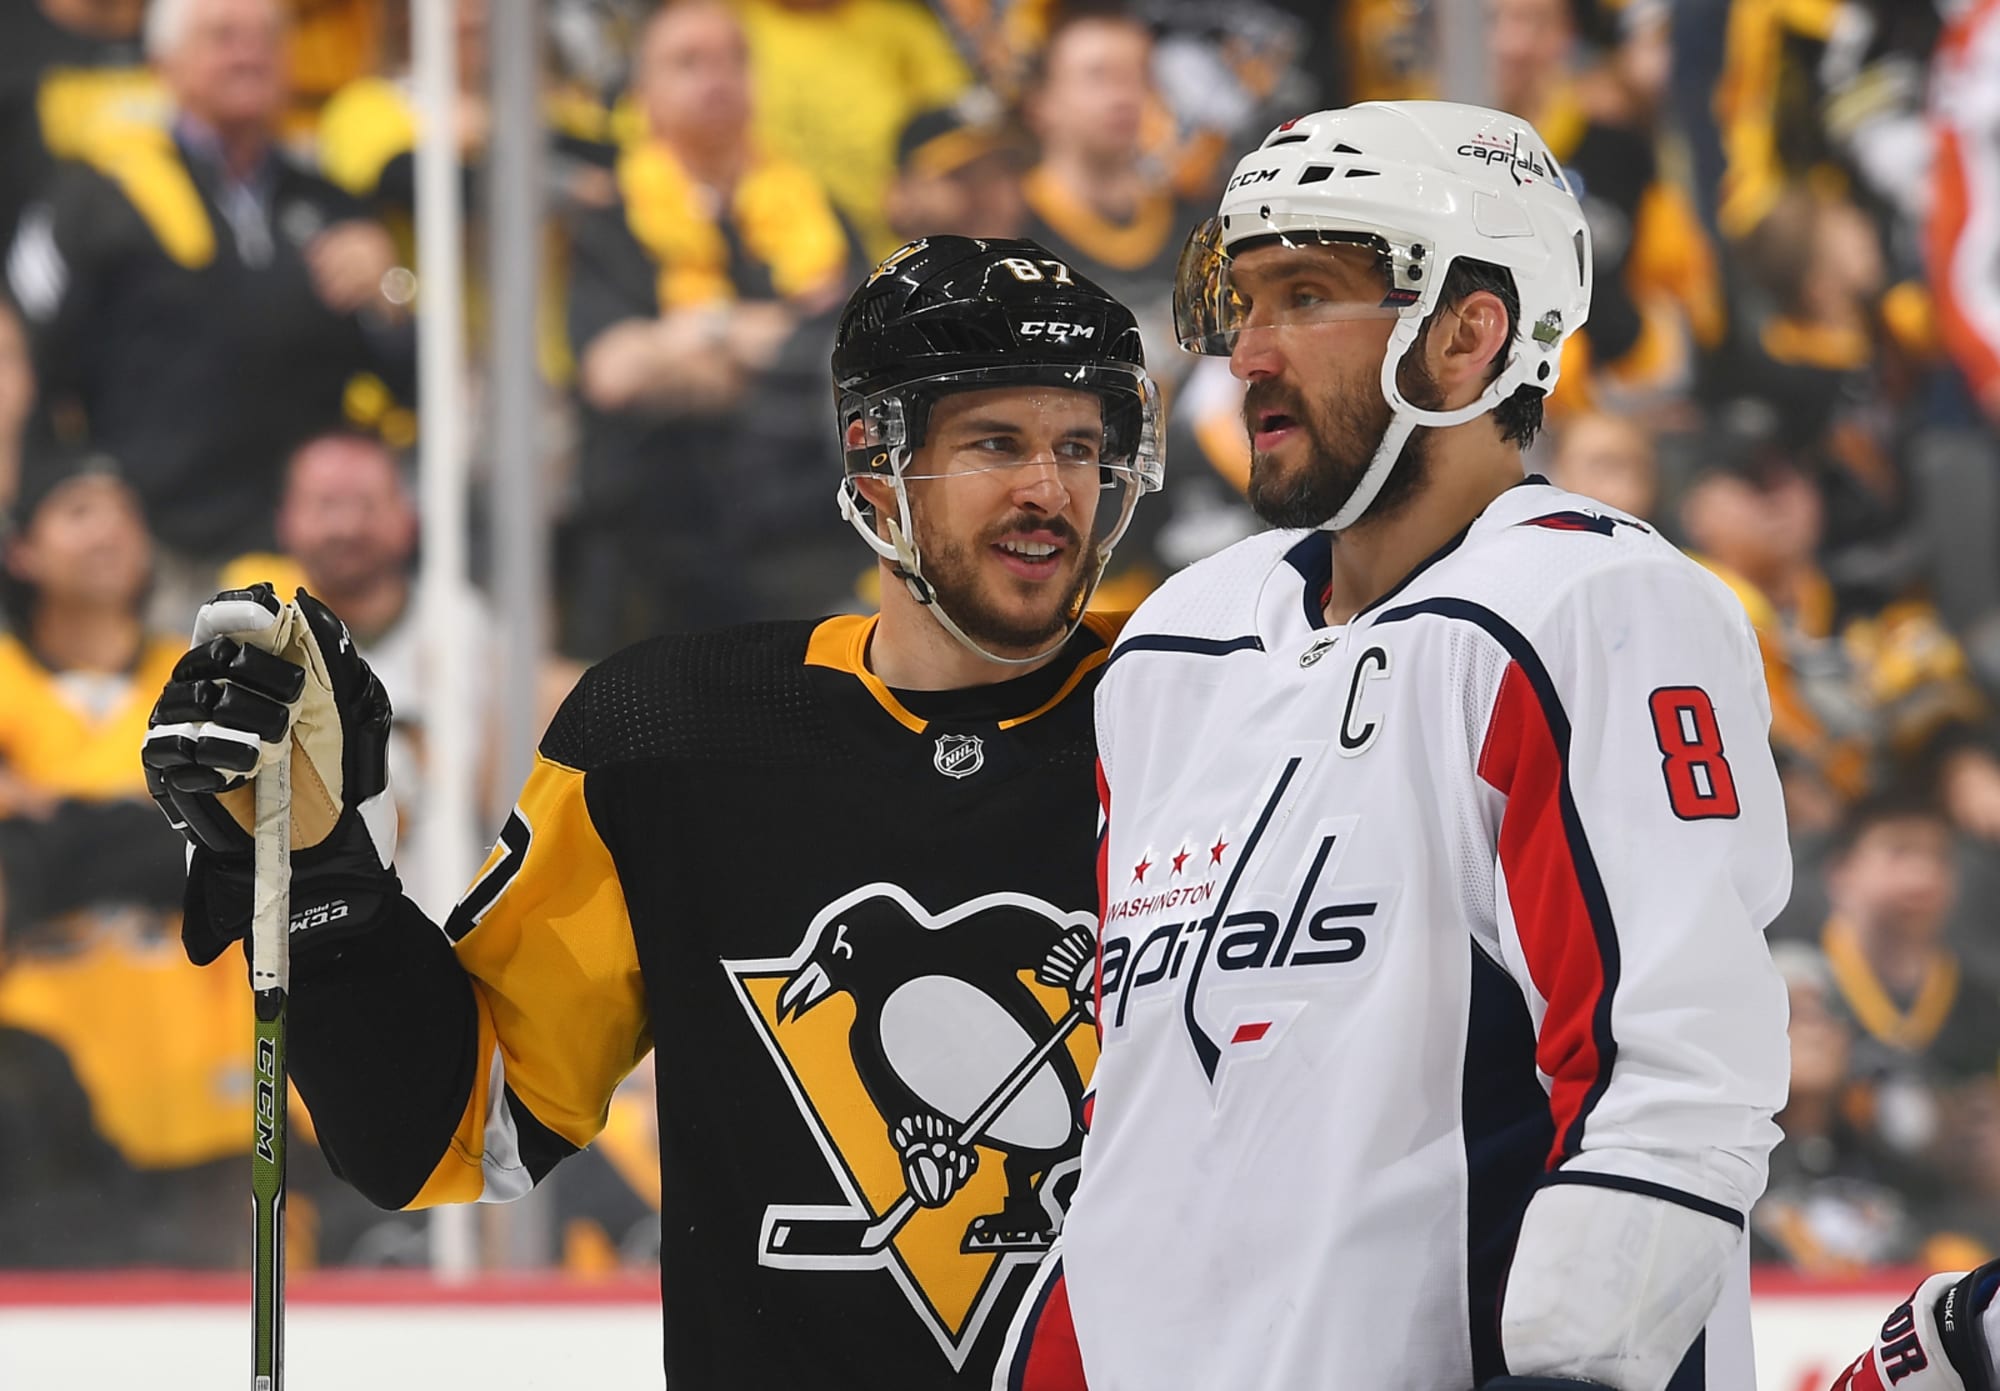 NHL schedule release 2018 5 matchups we're looking forward to most